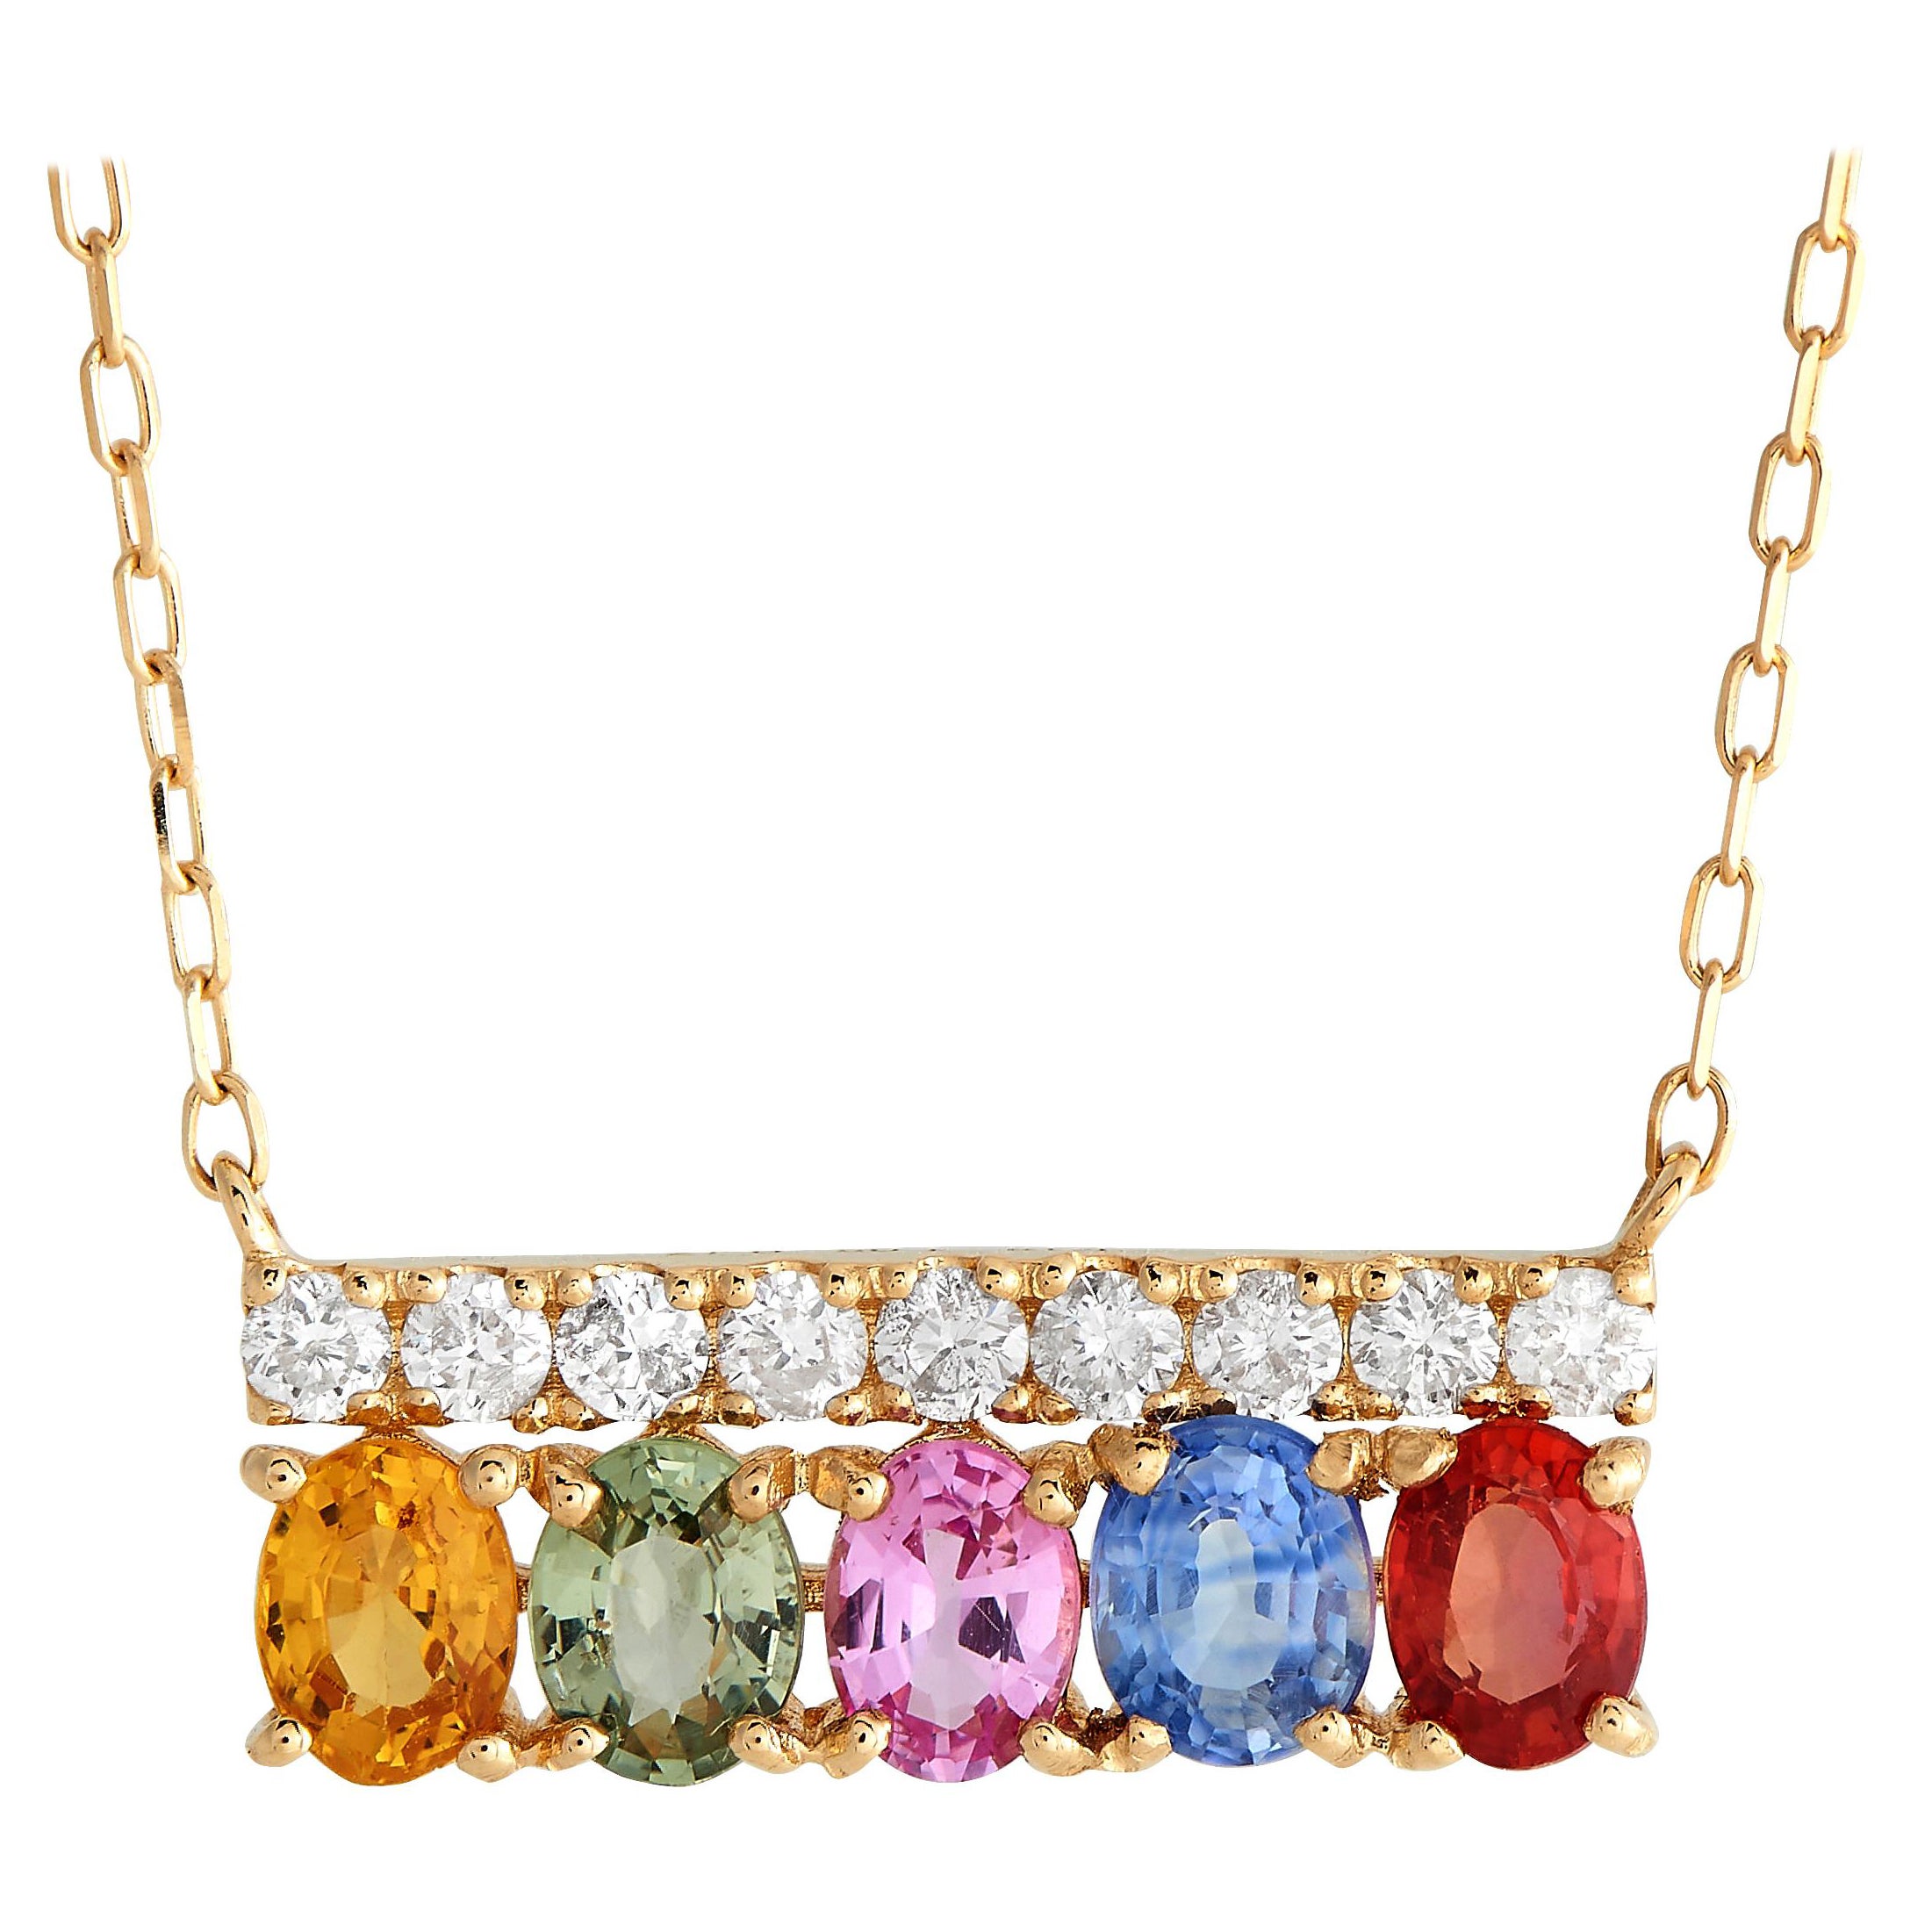 LB Exclusive 18K Yellow Gold 0.17ct Diamond and Multicolored Sapphire Necklace